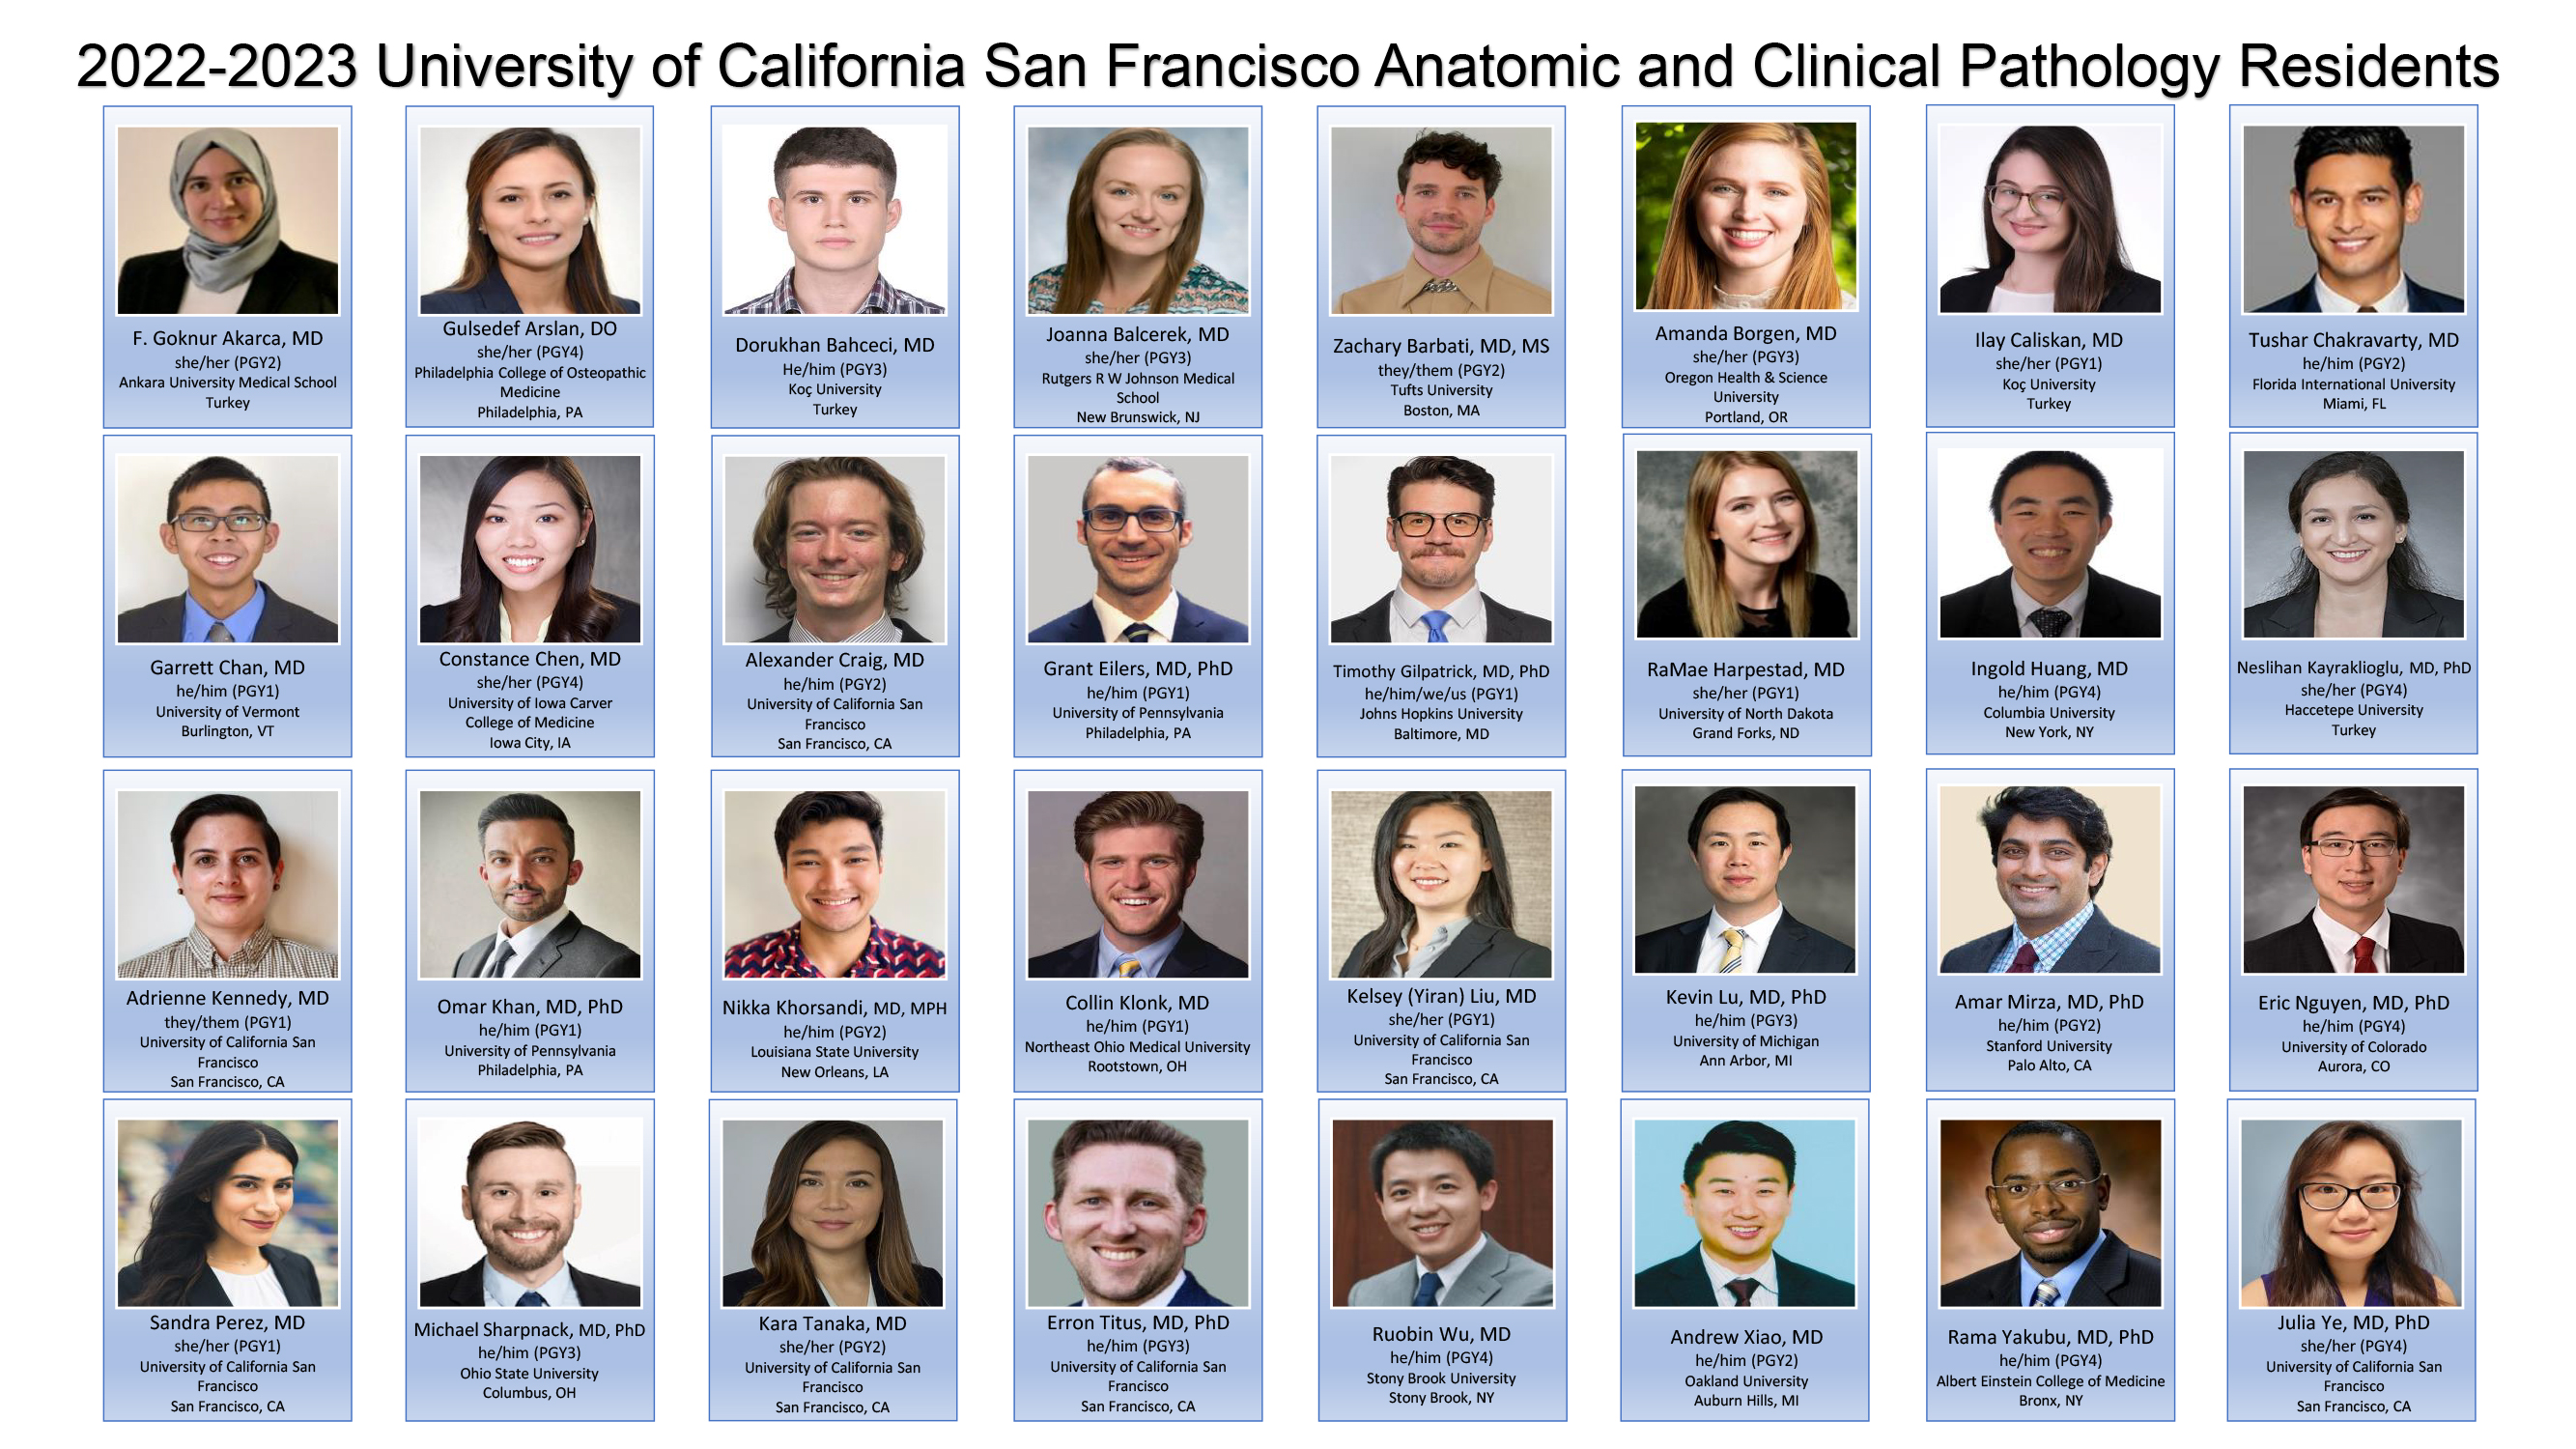 Anatomic and Clinical Pathology Residents